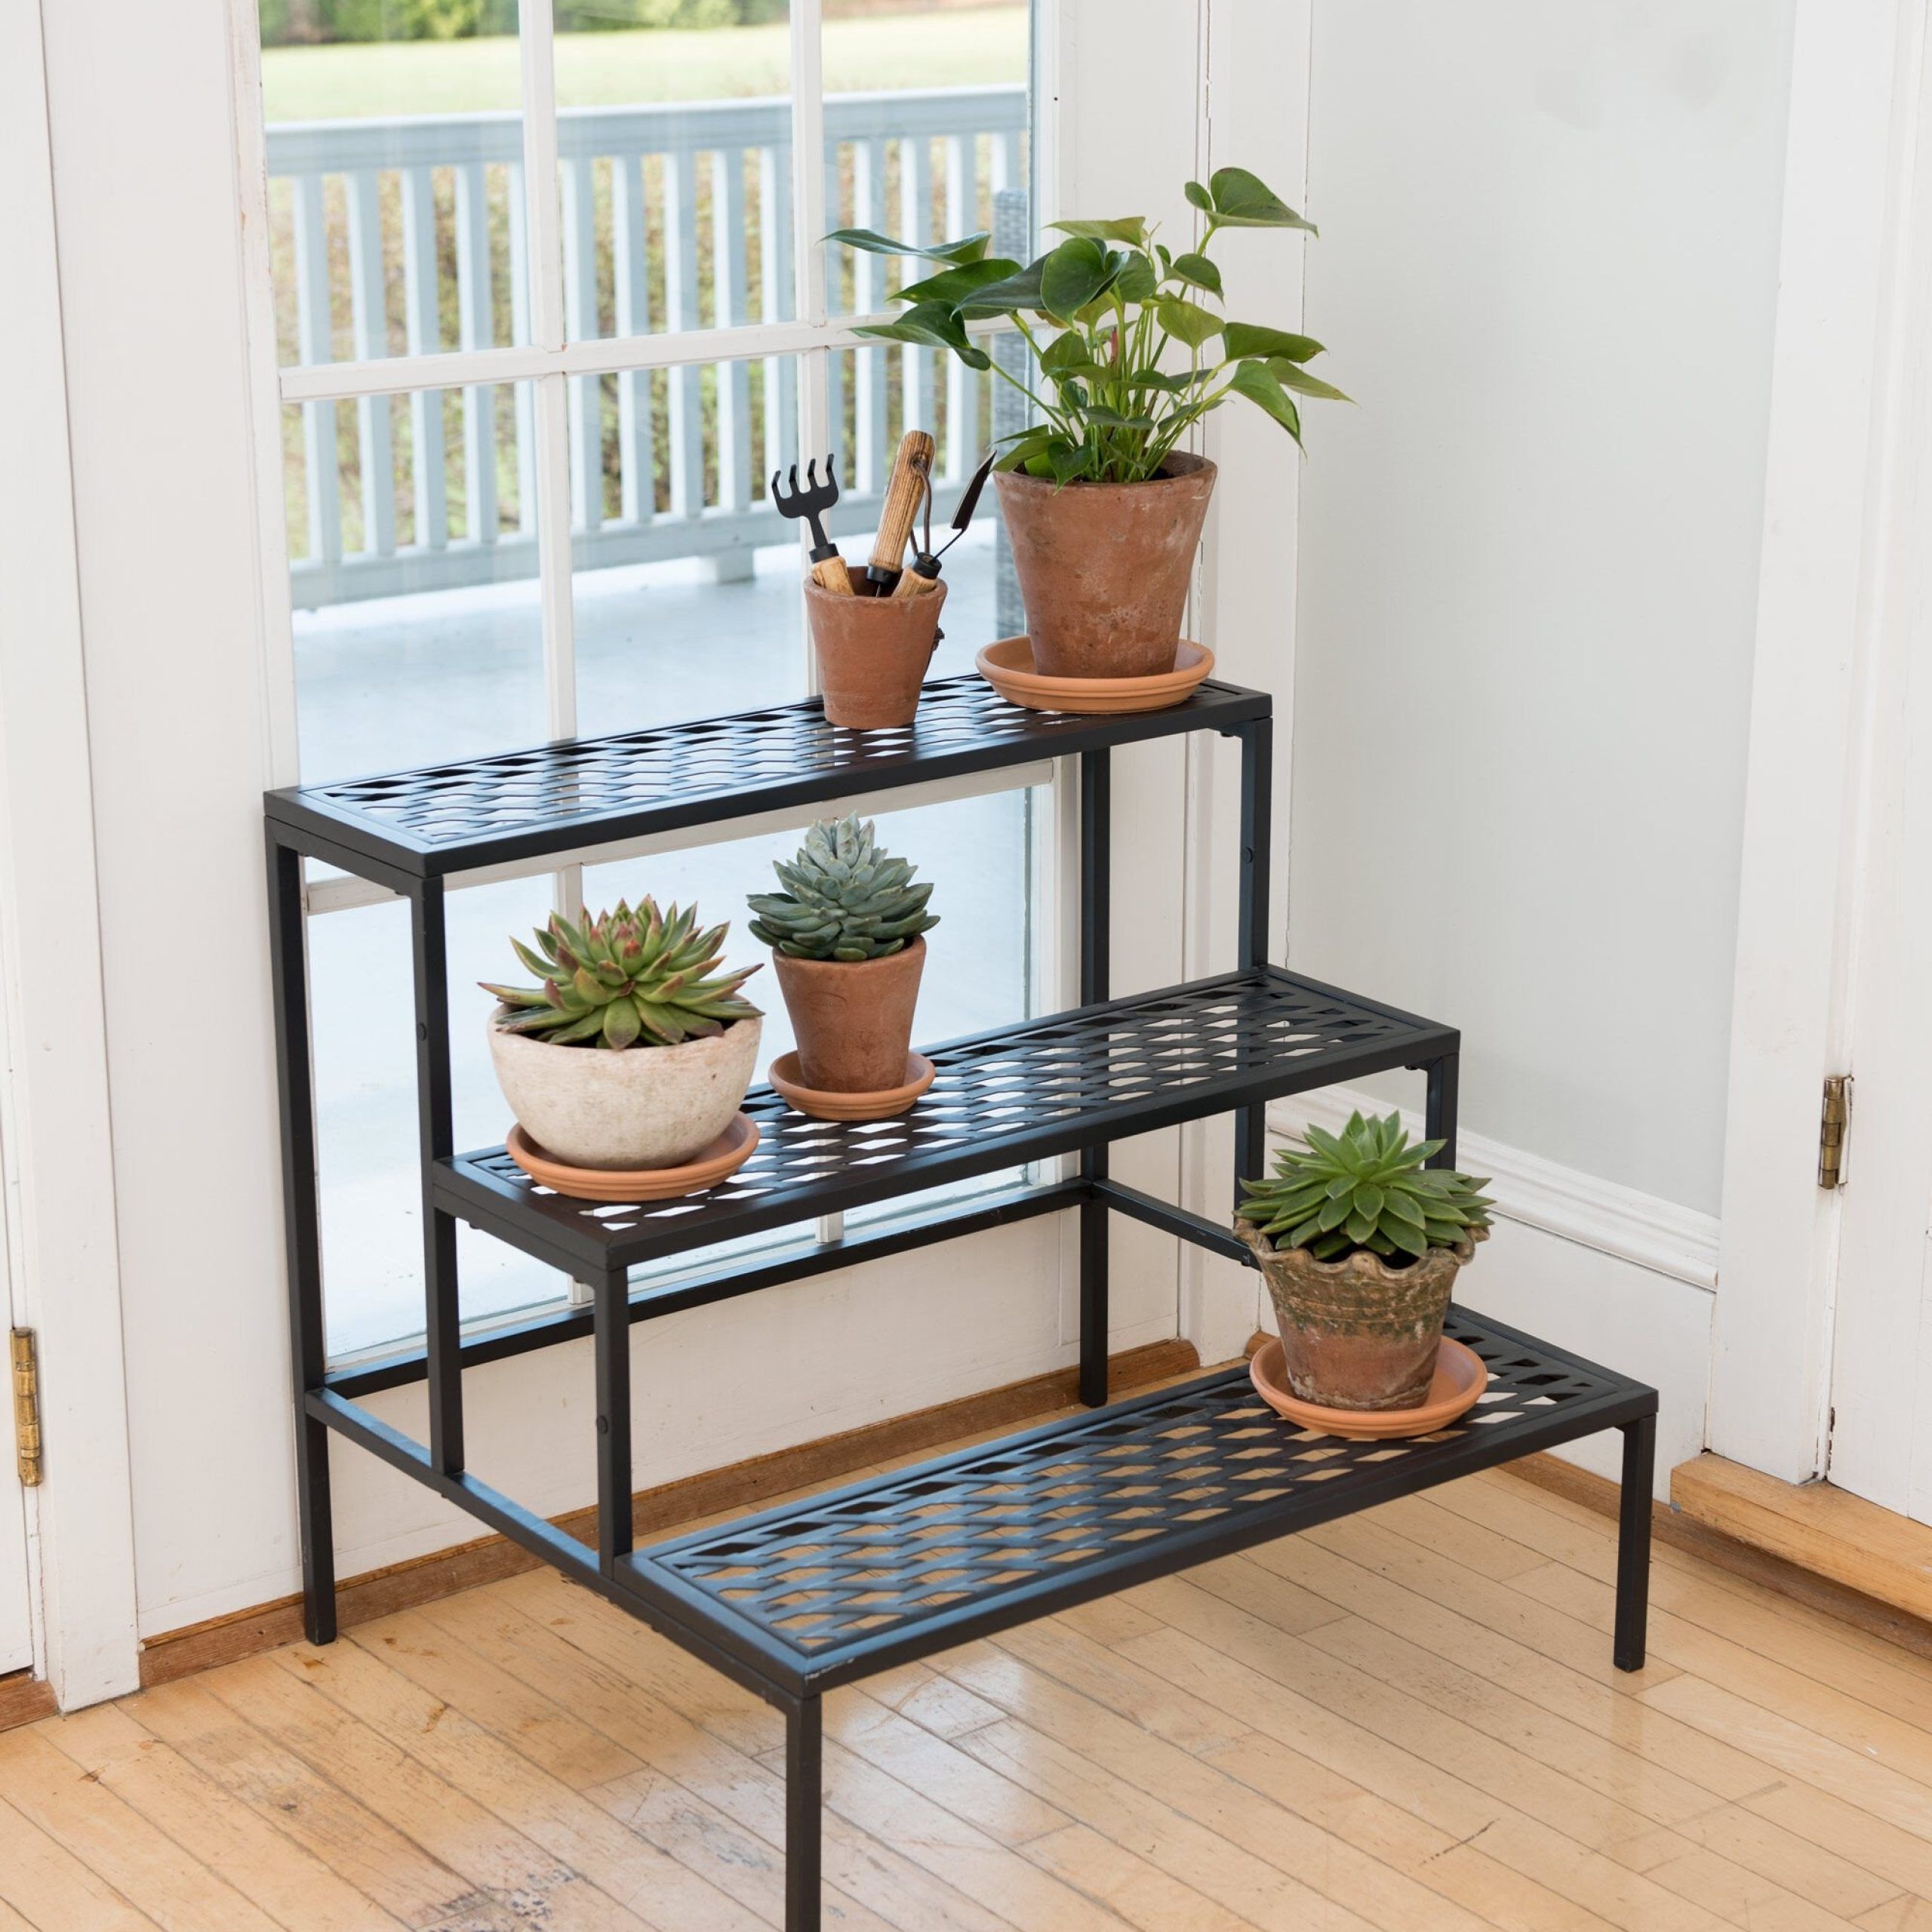 Lattice Multi Tiered Plant Stand – Black | Gardener'S Supply For Three Tier Plant Stands (View 4 of 15)